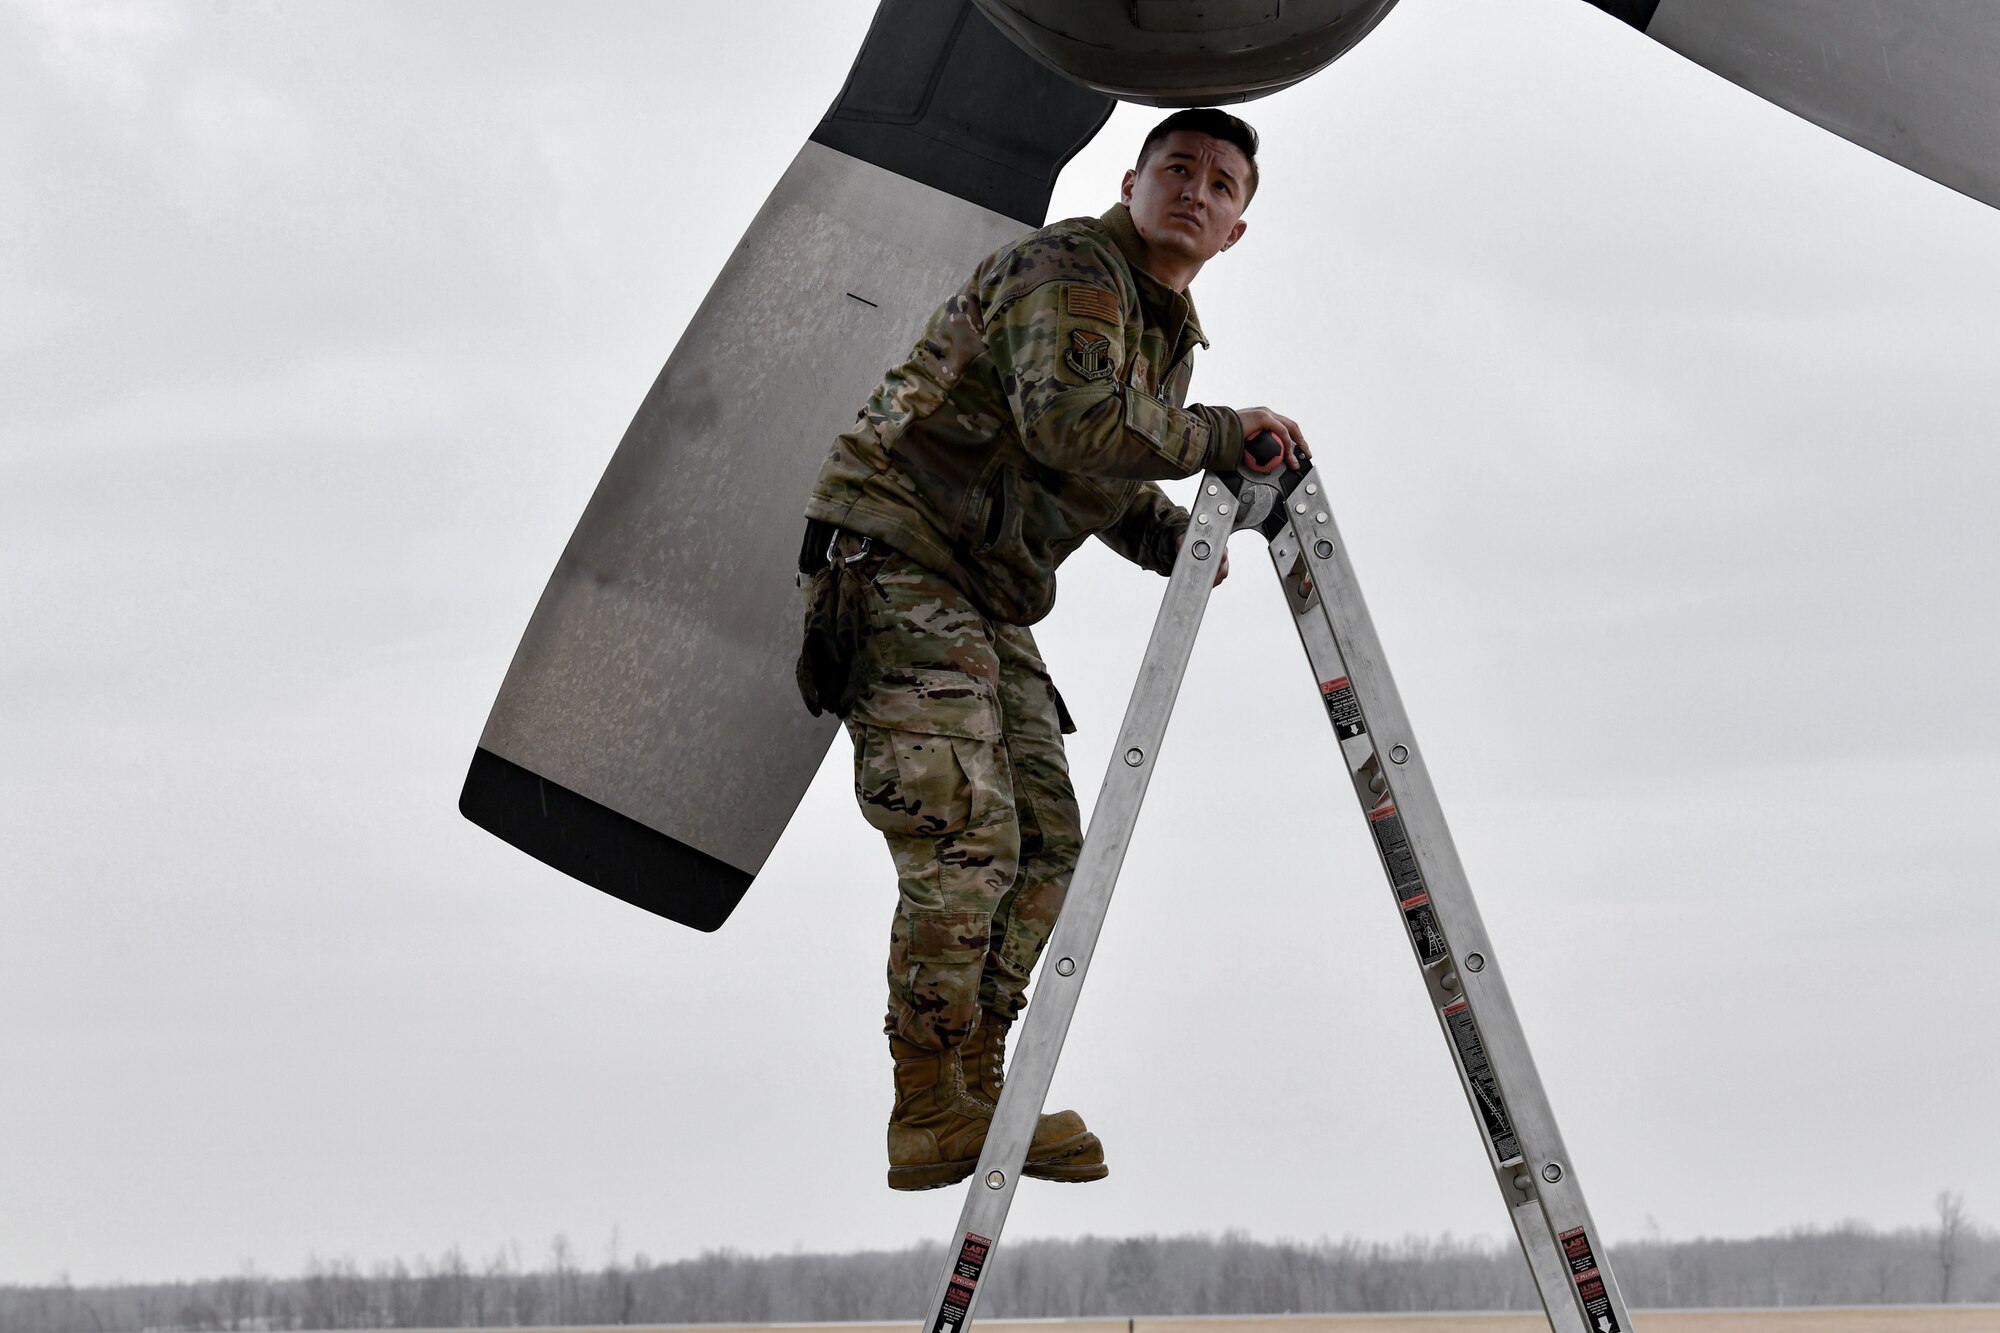 Senior Airman Creston Shirey, an aerospace maintenance journeyman assigned to the 910th Aircraft Maintenance Squadron, performs routine maintenance checks on Feb. 16, 2023, on the flight line at Youngstown Air Reserve Station, Ohio.